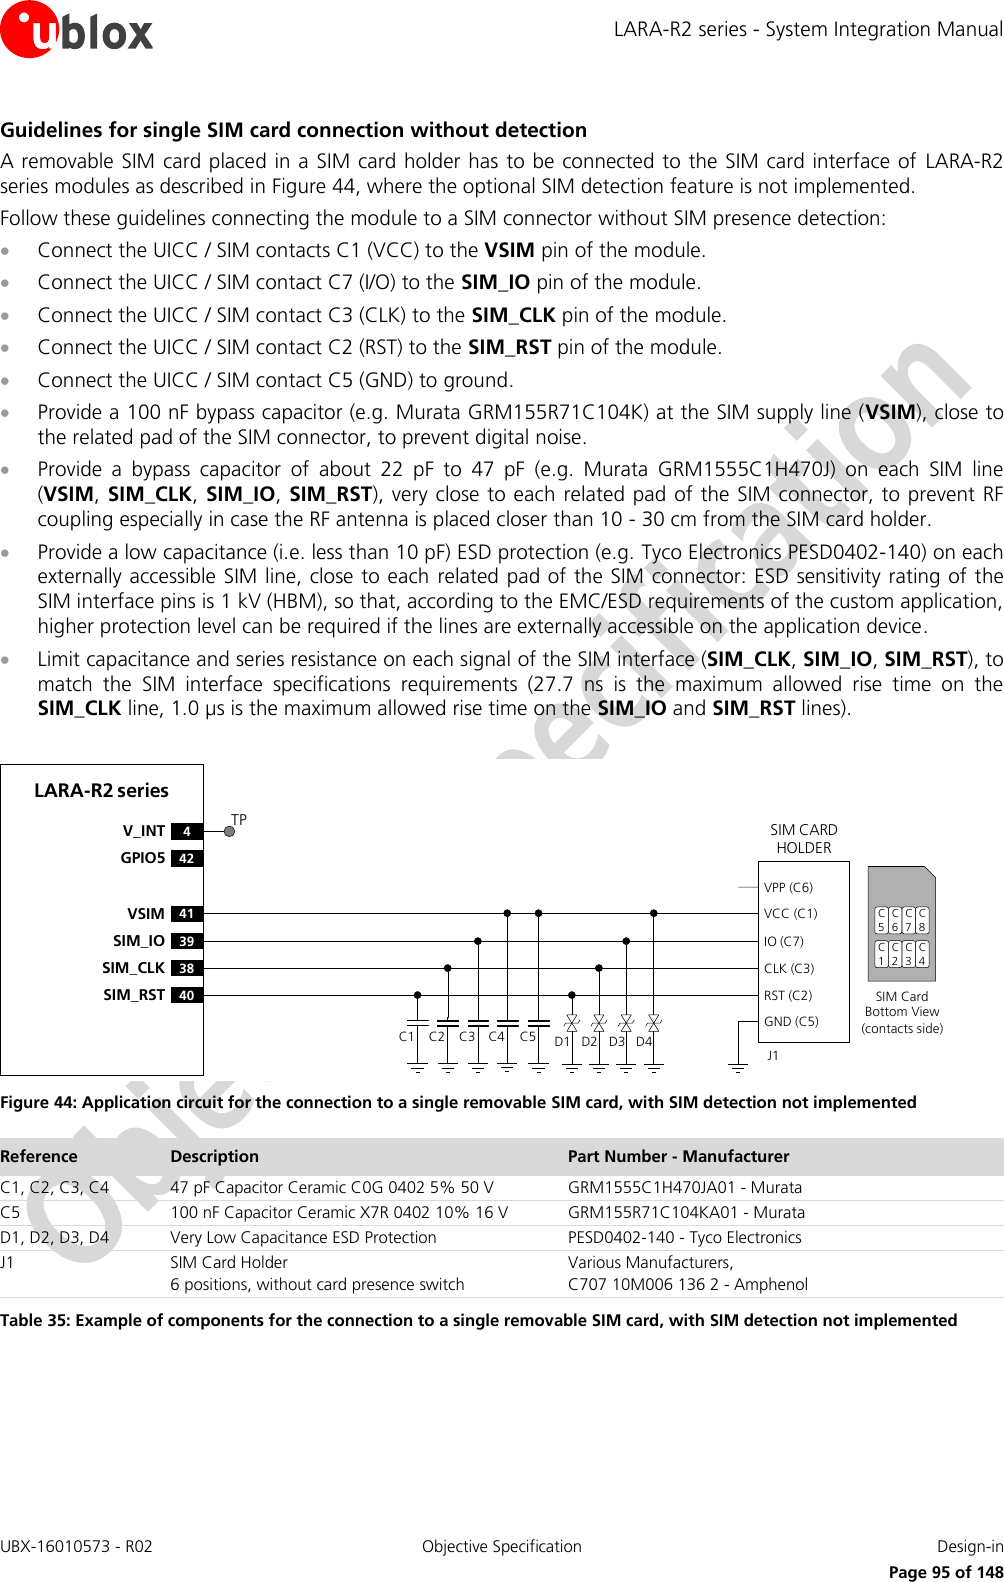 LARA-R2 series - System Integration Manual UBX-16010573 - R02  Objective Specification  Design-in     Page 95 of 148 Guidelines for single SIM card connection without detection A removable SIM card placed in a SIM card holder has  to be connected to the SIM card interface of  LARA-R2 series modules as described in Figure 44, where the optional SIM detection feature is not implemented. Follow these guidelines connecting the module to a SIM connector without SIM presence detection:  Connect the UICC / SIM contacts C1 (VCC) to the VSIM pin of the module.  Connect the UICC / SIM contact C7 (I/O) to the SIM_IO pin of the module.  Connect the UICC / SIM contact C3 (CLK) to the SIM_CLK pin of the module.  Connect the UICC / SIM contact C2 (RST) to the SIM_RST pin of the module.  Connect the UICC / SIM contact C5 (GND) to ground.  Provide a 100 nF bypass capacitor (e.g. Murata GRM155R71C104K) at the SIM supply line (VSIM), close to the related pad of the SIM connector, to prevent digital noise.  Provide  a  bypass  capacitor  of  about  22  pF  to  47  pF  (e.g.  Murata  GRM1555C1H470J)  on  each  SIM  line (VSIM, SIM_CLK,  SIM_IO,  SIM_RST), very close to each  related pad of the SIM connector, to prevent RF coupling especially in case the RF antenna is placed closer than 10 - 30 cm from the SIM card holder.  Provide a low capacitance (i.e. less than 10 pF) ESD protection (e.g. Tyco Electronics PESD0402-140) on each externally accessible SIM line, close to each  related pad of the SIM connector: ESD sensitivity rating of the SIM interface pins is 1 kV (HBM), so that, according to the EMC/ESD requirements of the custom application, higher protection level can be required if the lines are externally accessible on the application device.  Limit capacitance and series resistance on each signal of the SIM interface (SIM_CLK, SIM_IO, SIM_RST), to match  the  SIM  interface  specifications  requirements  (27.7  ns  is  the  maximum  allowed  rise  time  on  the SIM_CLK line, 1.0 µs is the maximum allowed rise time on the SIM_IO and SIM_RST lines).  LARA-R2 series41VSIM39SIM_IO38SIM_CLK40SIM_RST4V_INT42GPIO5SIM CARD HOLDERC5C6C7C1C2C3SIM Card Bottom View (contacts side)C1VPP (C6)VCC (C1)IO (C7)CLK (C3)RST (C2)GND (C5)C2 C3 C5J1C4 D1 D2 D3 D4C8C4TP Figure 44: Application circuit for the connection to a single removable SIM card, with SIM detection not implemented Reference Description Part Number - Manufacturer C1, C2, C3, C4 47 pF Capacitor Ceramic C0G 0402 5% 50 V GRM1555C1H470JA01 - Murata C5 100 nF Capacitor Ceramic X7R 0402 10% 16 V GRM155R71C104KA01 - Murata D1, D2, D3, D4 Very Low Capacitance ESD Protection PESD0402-140 - Tyco Electronics  J1 SIM Card Holder 6 positions, without card presence switch Various Manufacturers, C707 10M006 136 2 - Amphenol Table 35: Example of components for the connection to a single removable SIM card, with SIM detection not implemented  